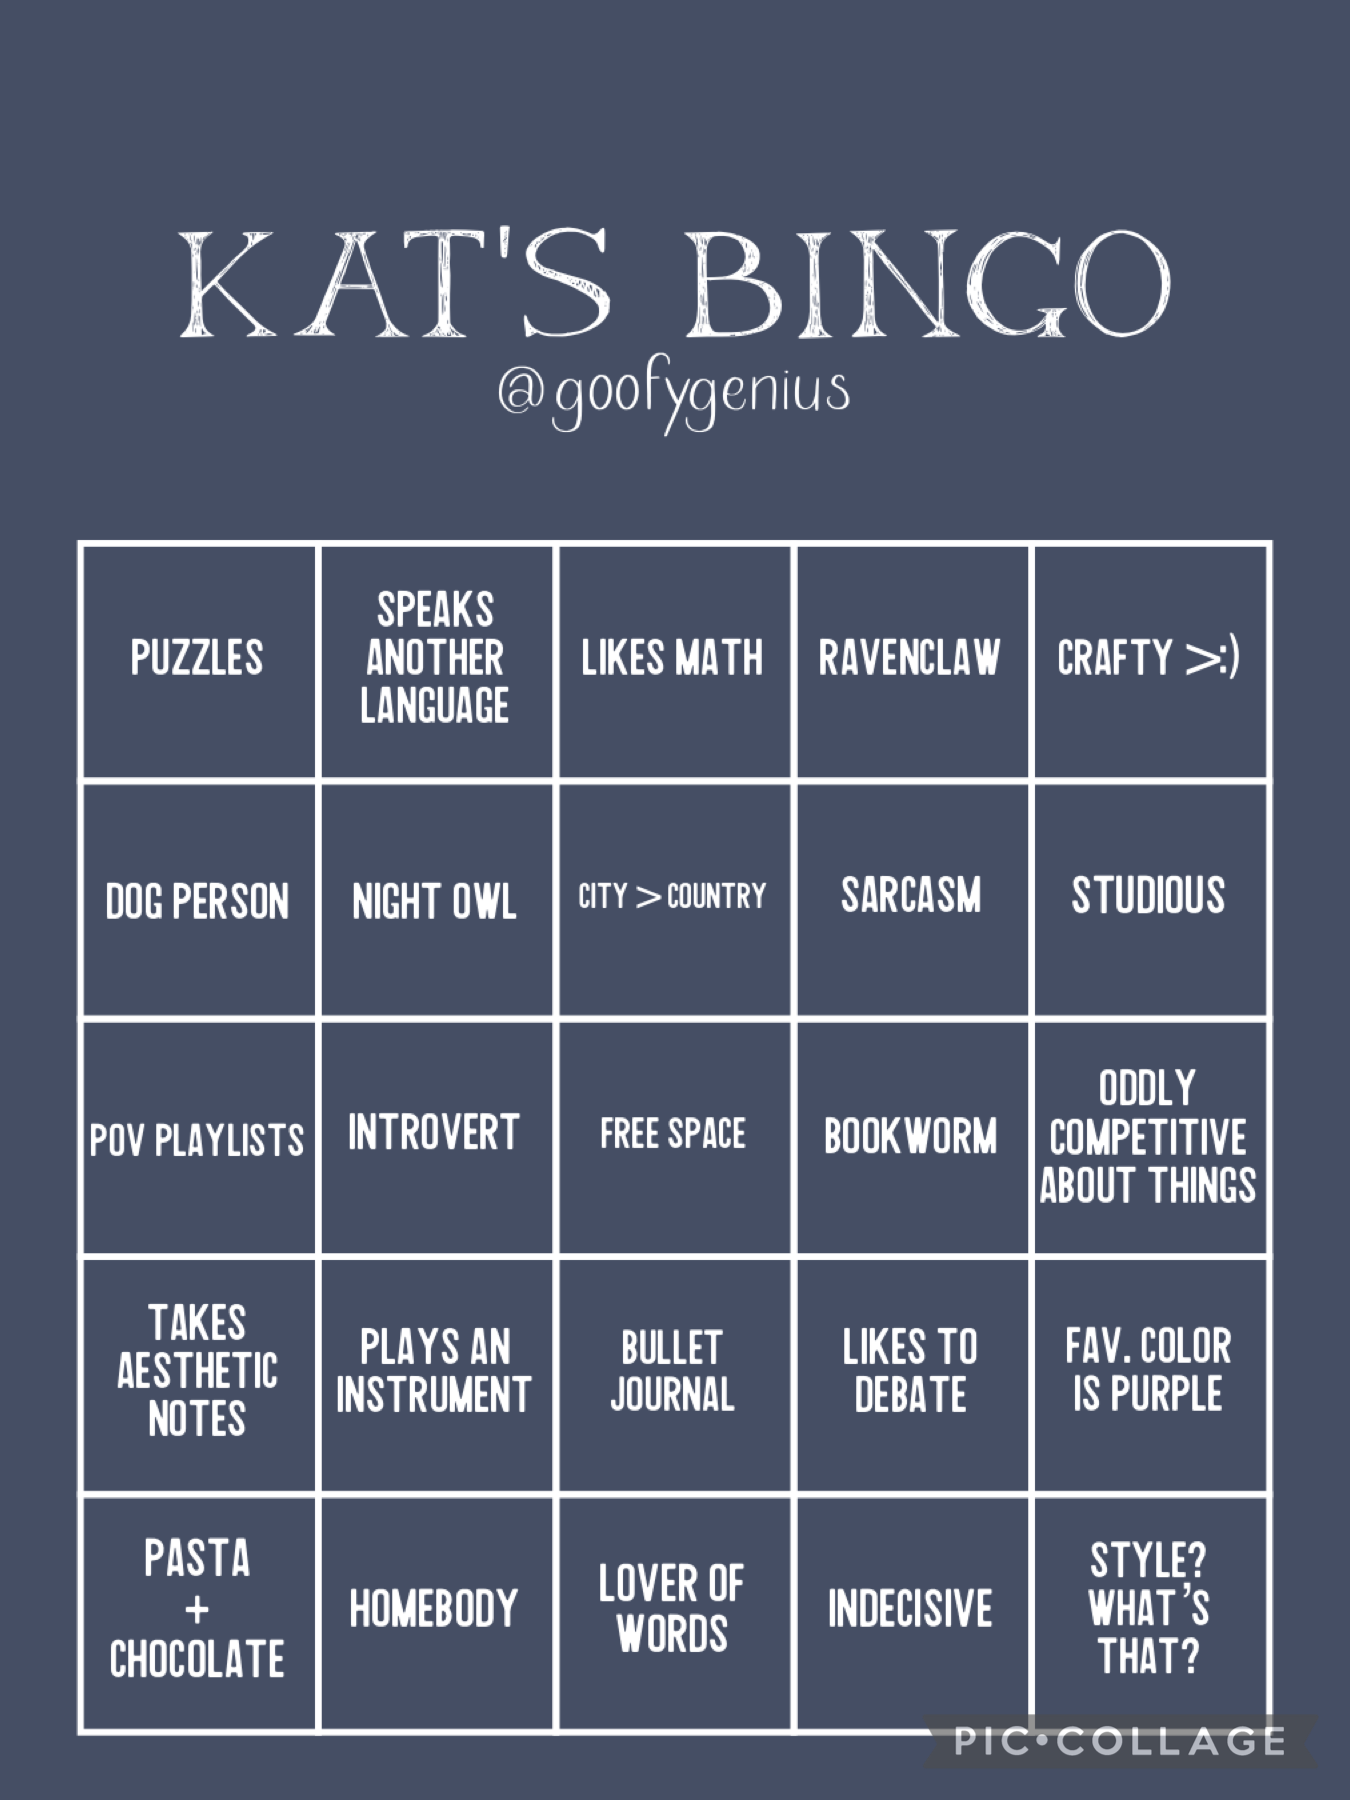 might as well make a bingo for me too. Thinking of stuff to put is harder than it seems ;-;